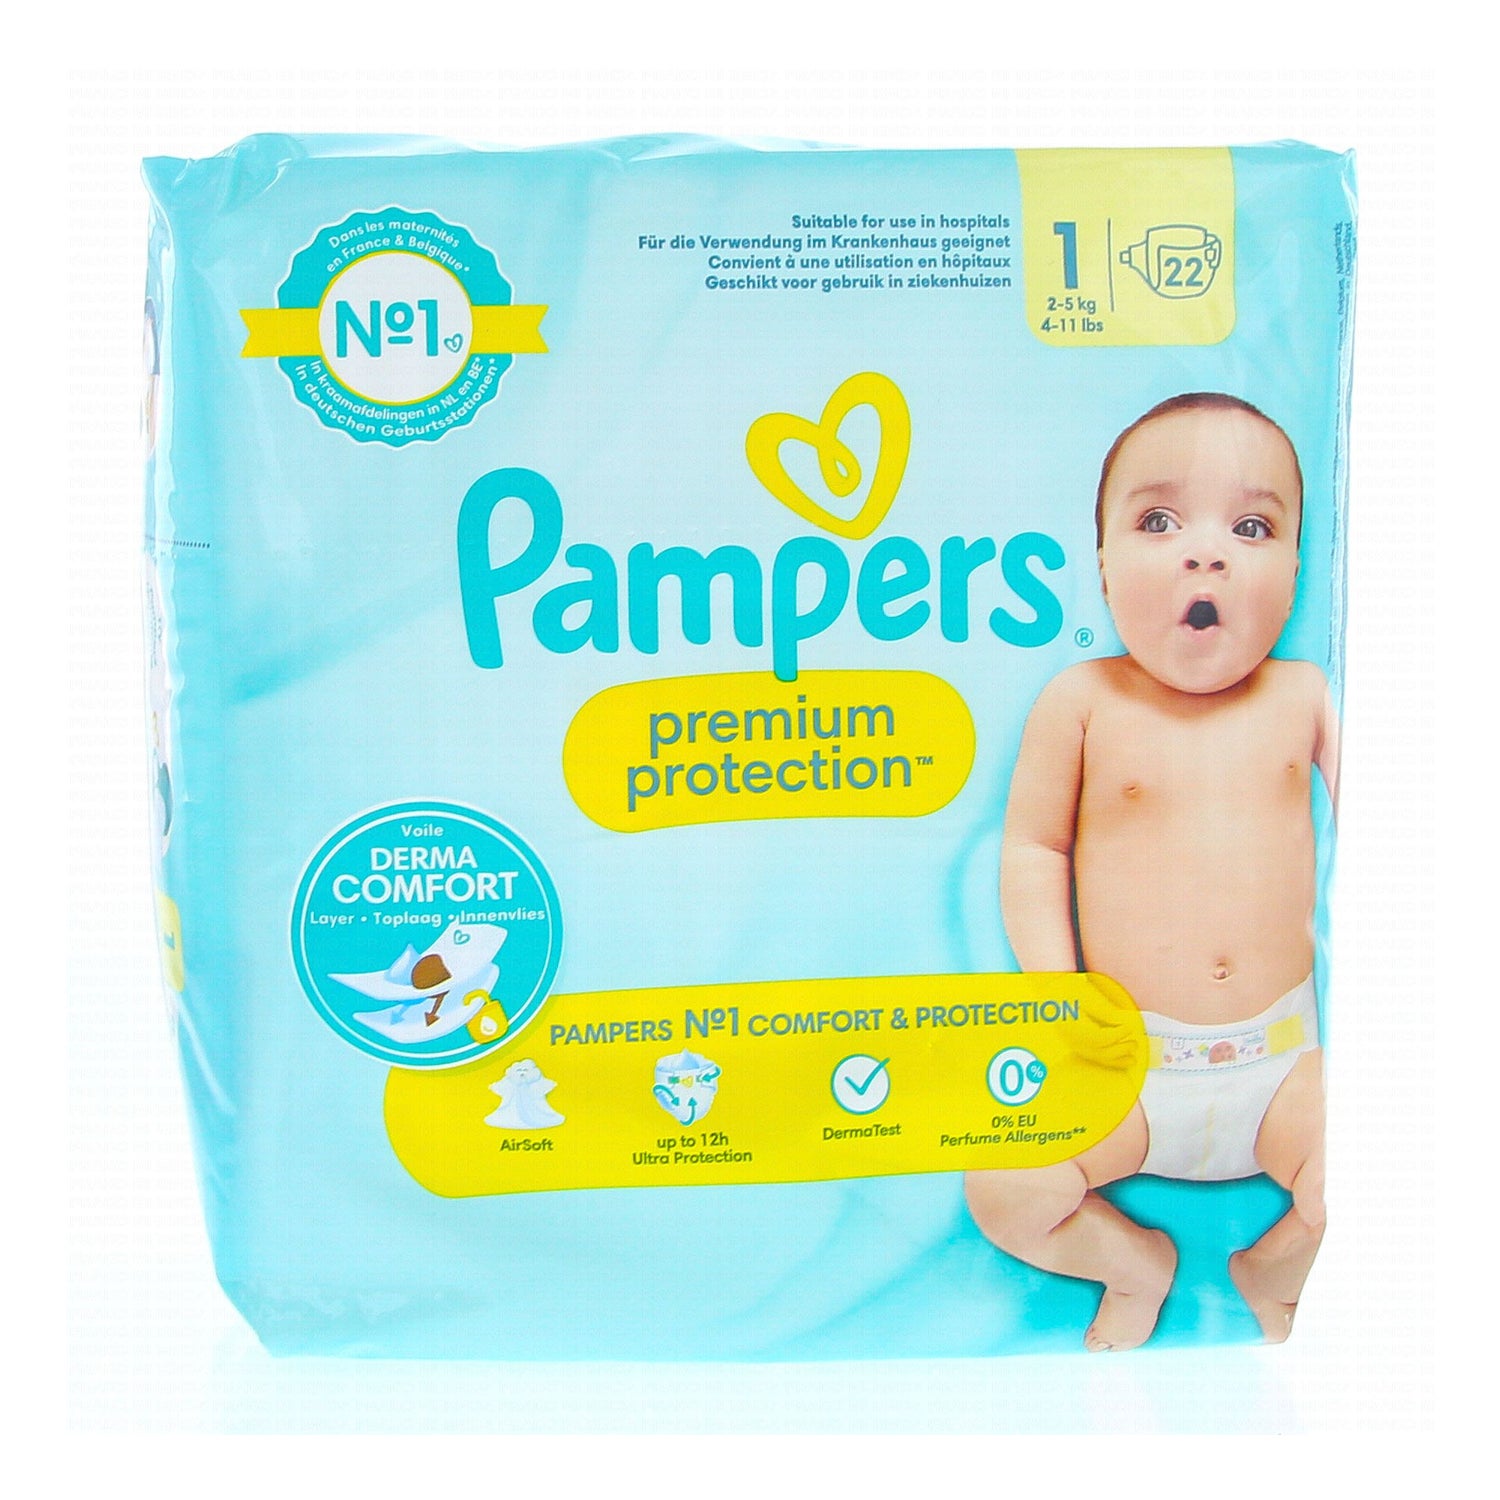 Couches Bébé Pampers Harmonie Taille 1, 2-5kg, 24 Couches